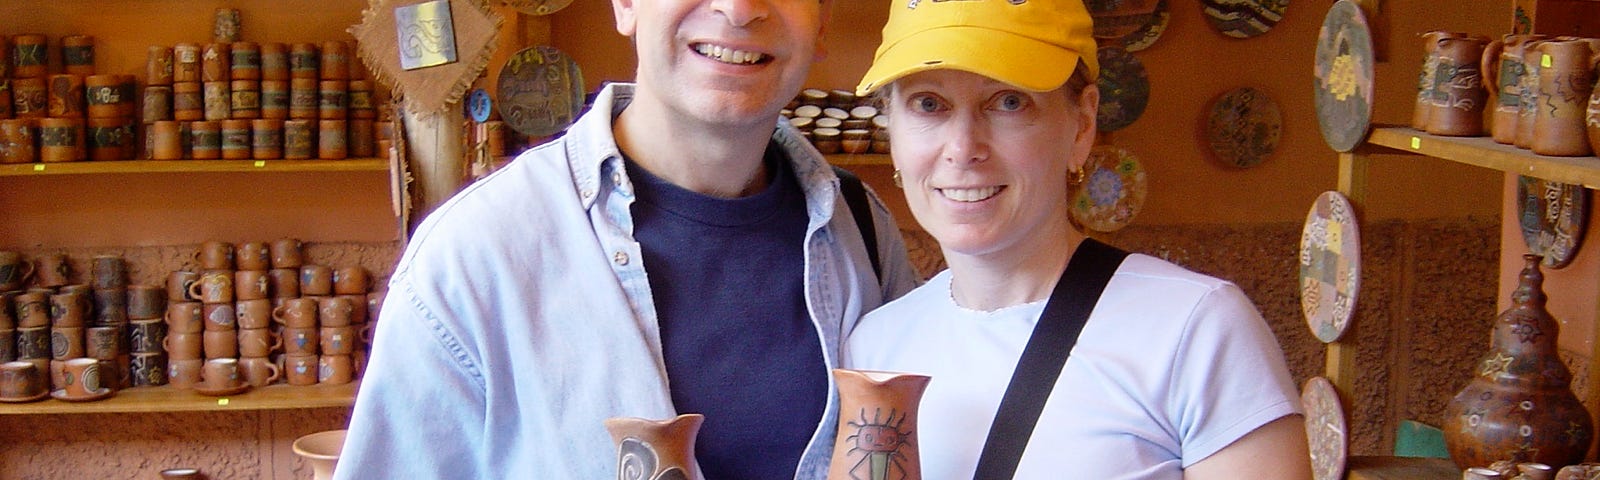 Man and woman holding handmade ceramic pitchers in shop